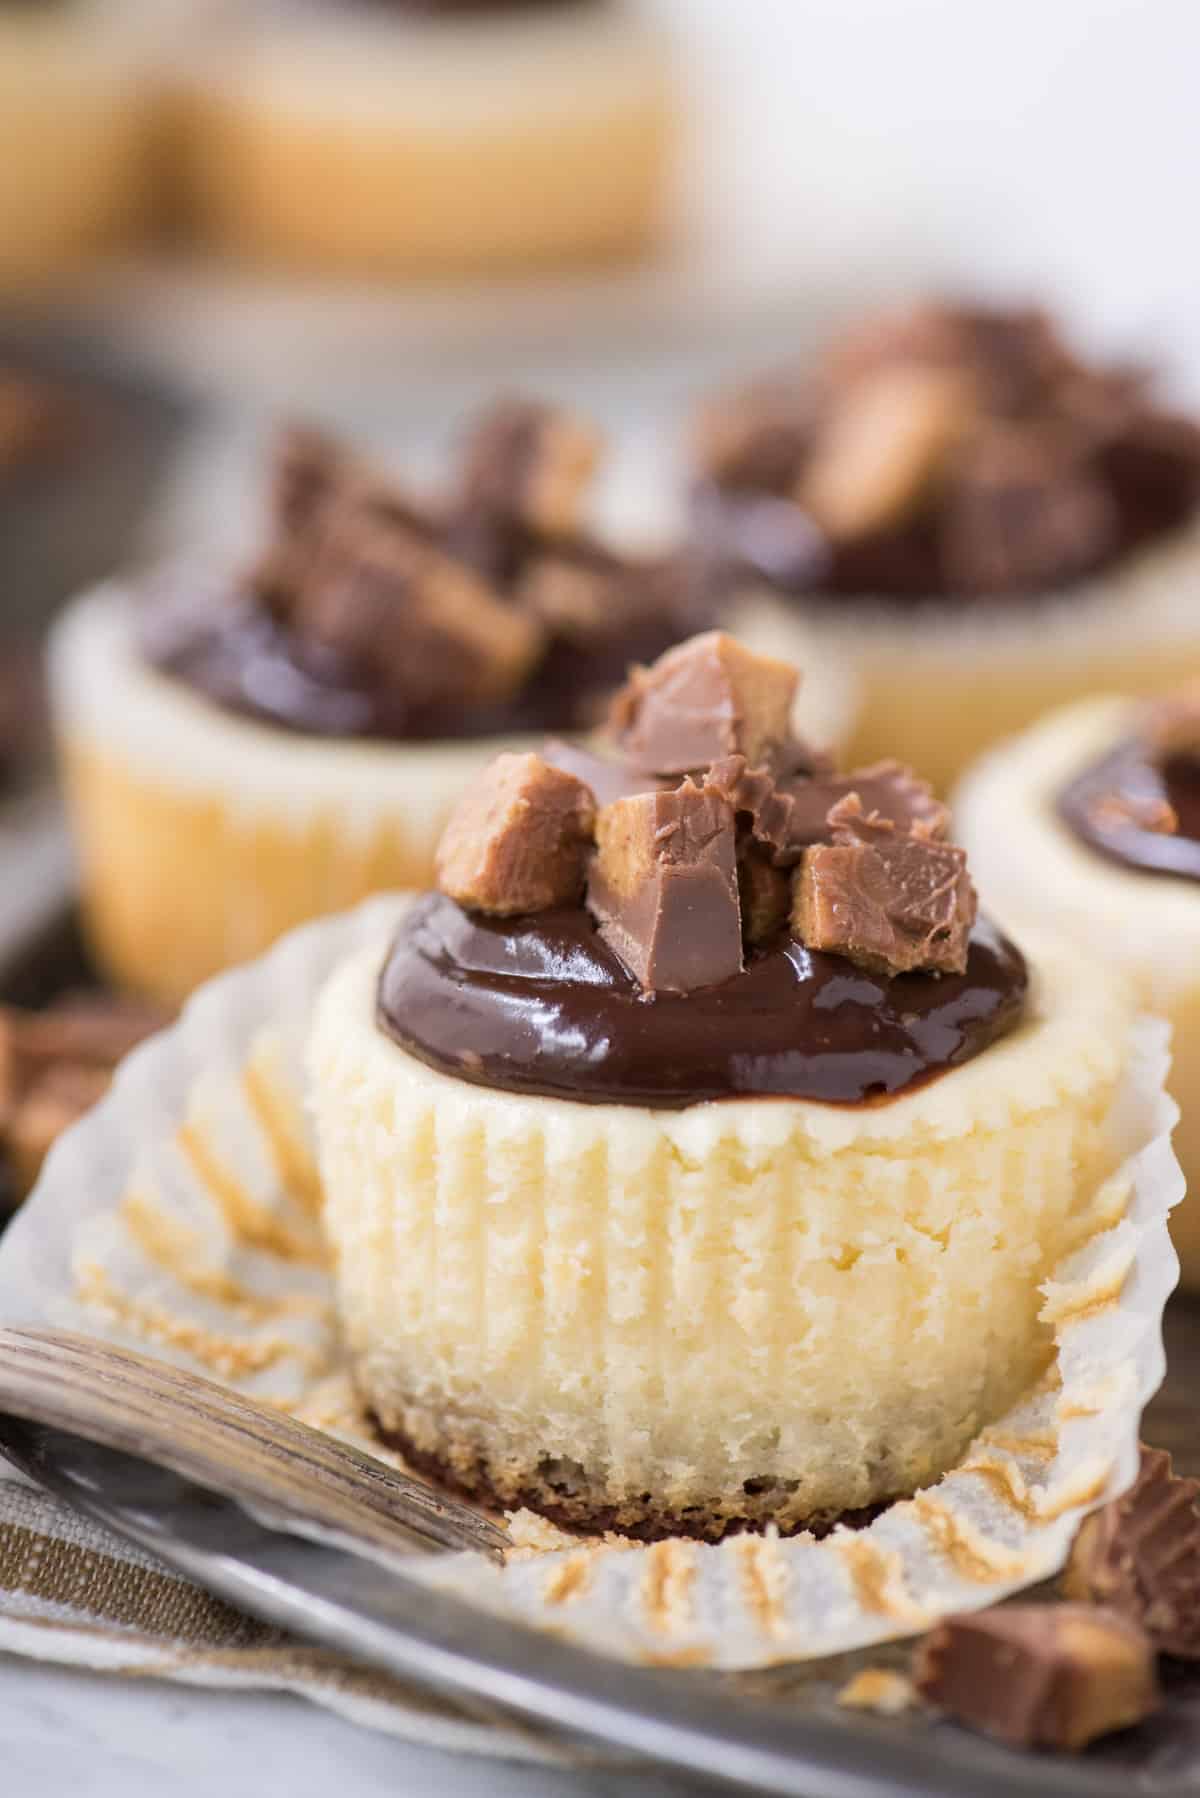 mini cheesecake topped with chocolate ganache and reese’s peanut butter cup pieces